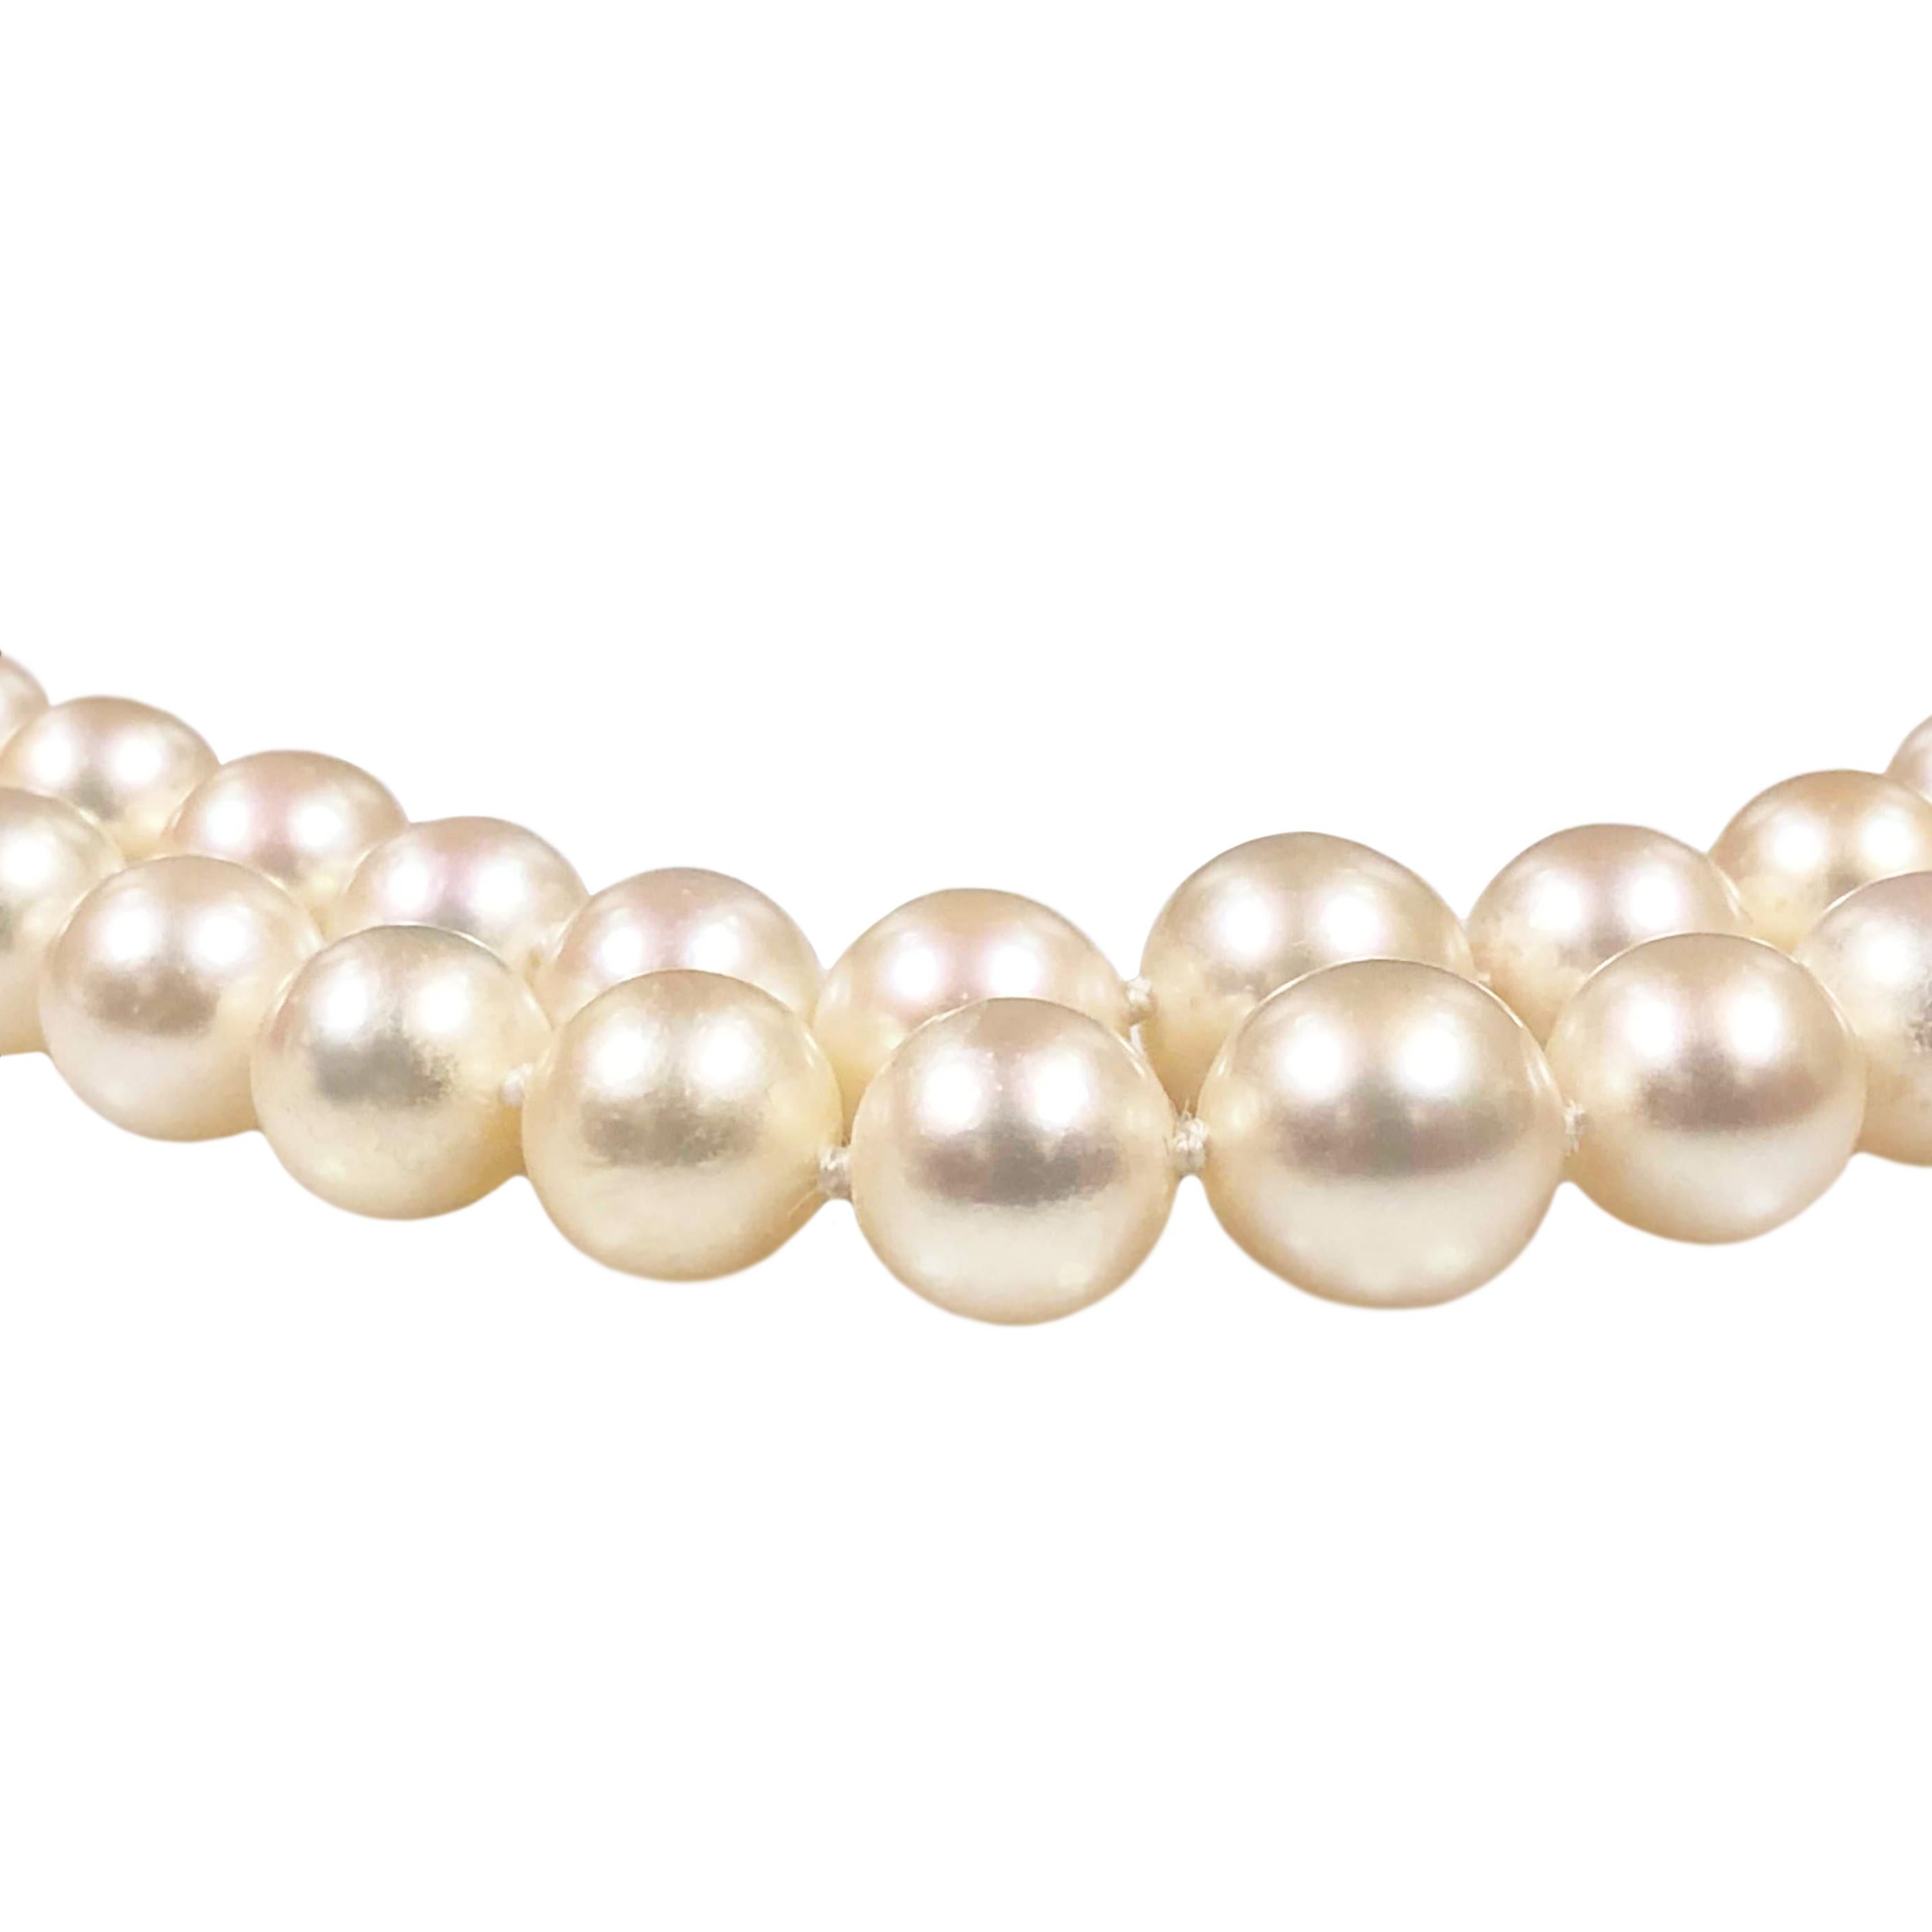 Circa 1960s Cartier Double Strand necklace measuring 16 1/2 inches in length and comprised of Fine Round Cultured Pearls measuring in size from 7.5 MM up to 10 MM, the Pearls are White in Color with a light Pink tint, they Grade as A+ with very